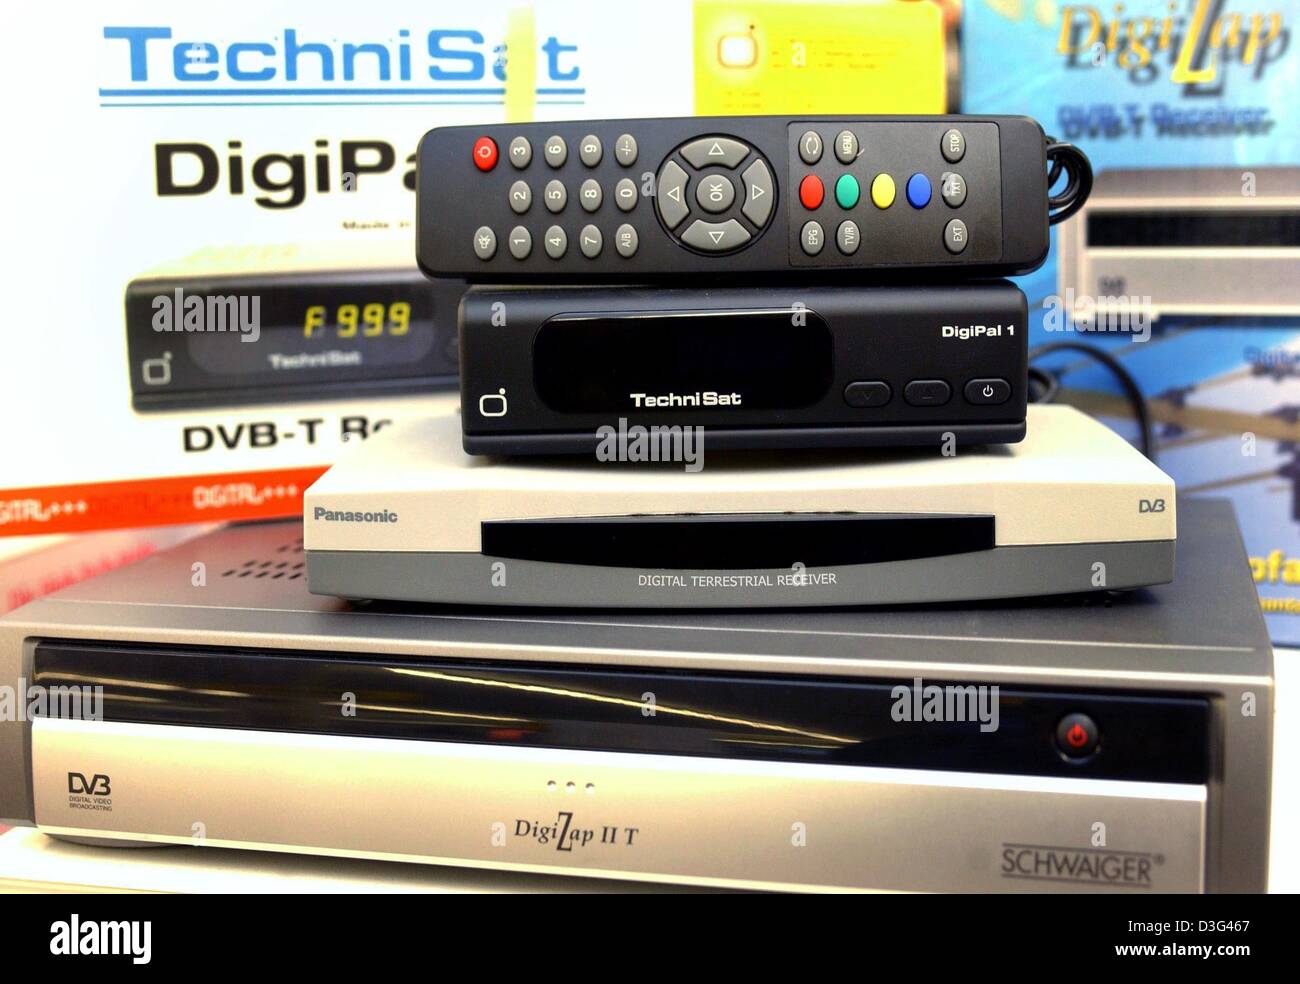 dpa) - Various decoders for digital television (Digital Video Broadcasting  Terrestrial, DVB-T) are piled on the shelves of the electronics store  Medi-Max in Frankfurt Oder, eastern Germany, 3 February 2003. Ten percent